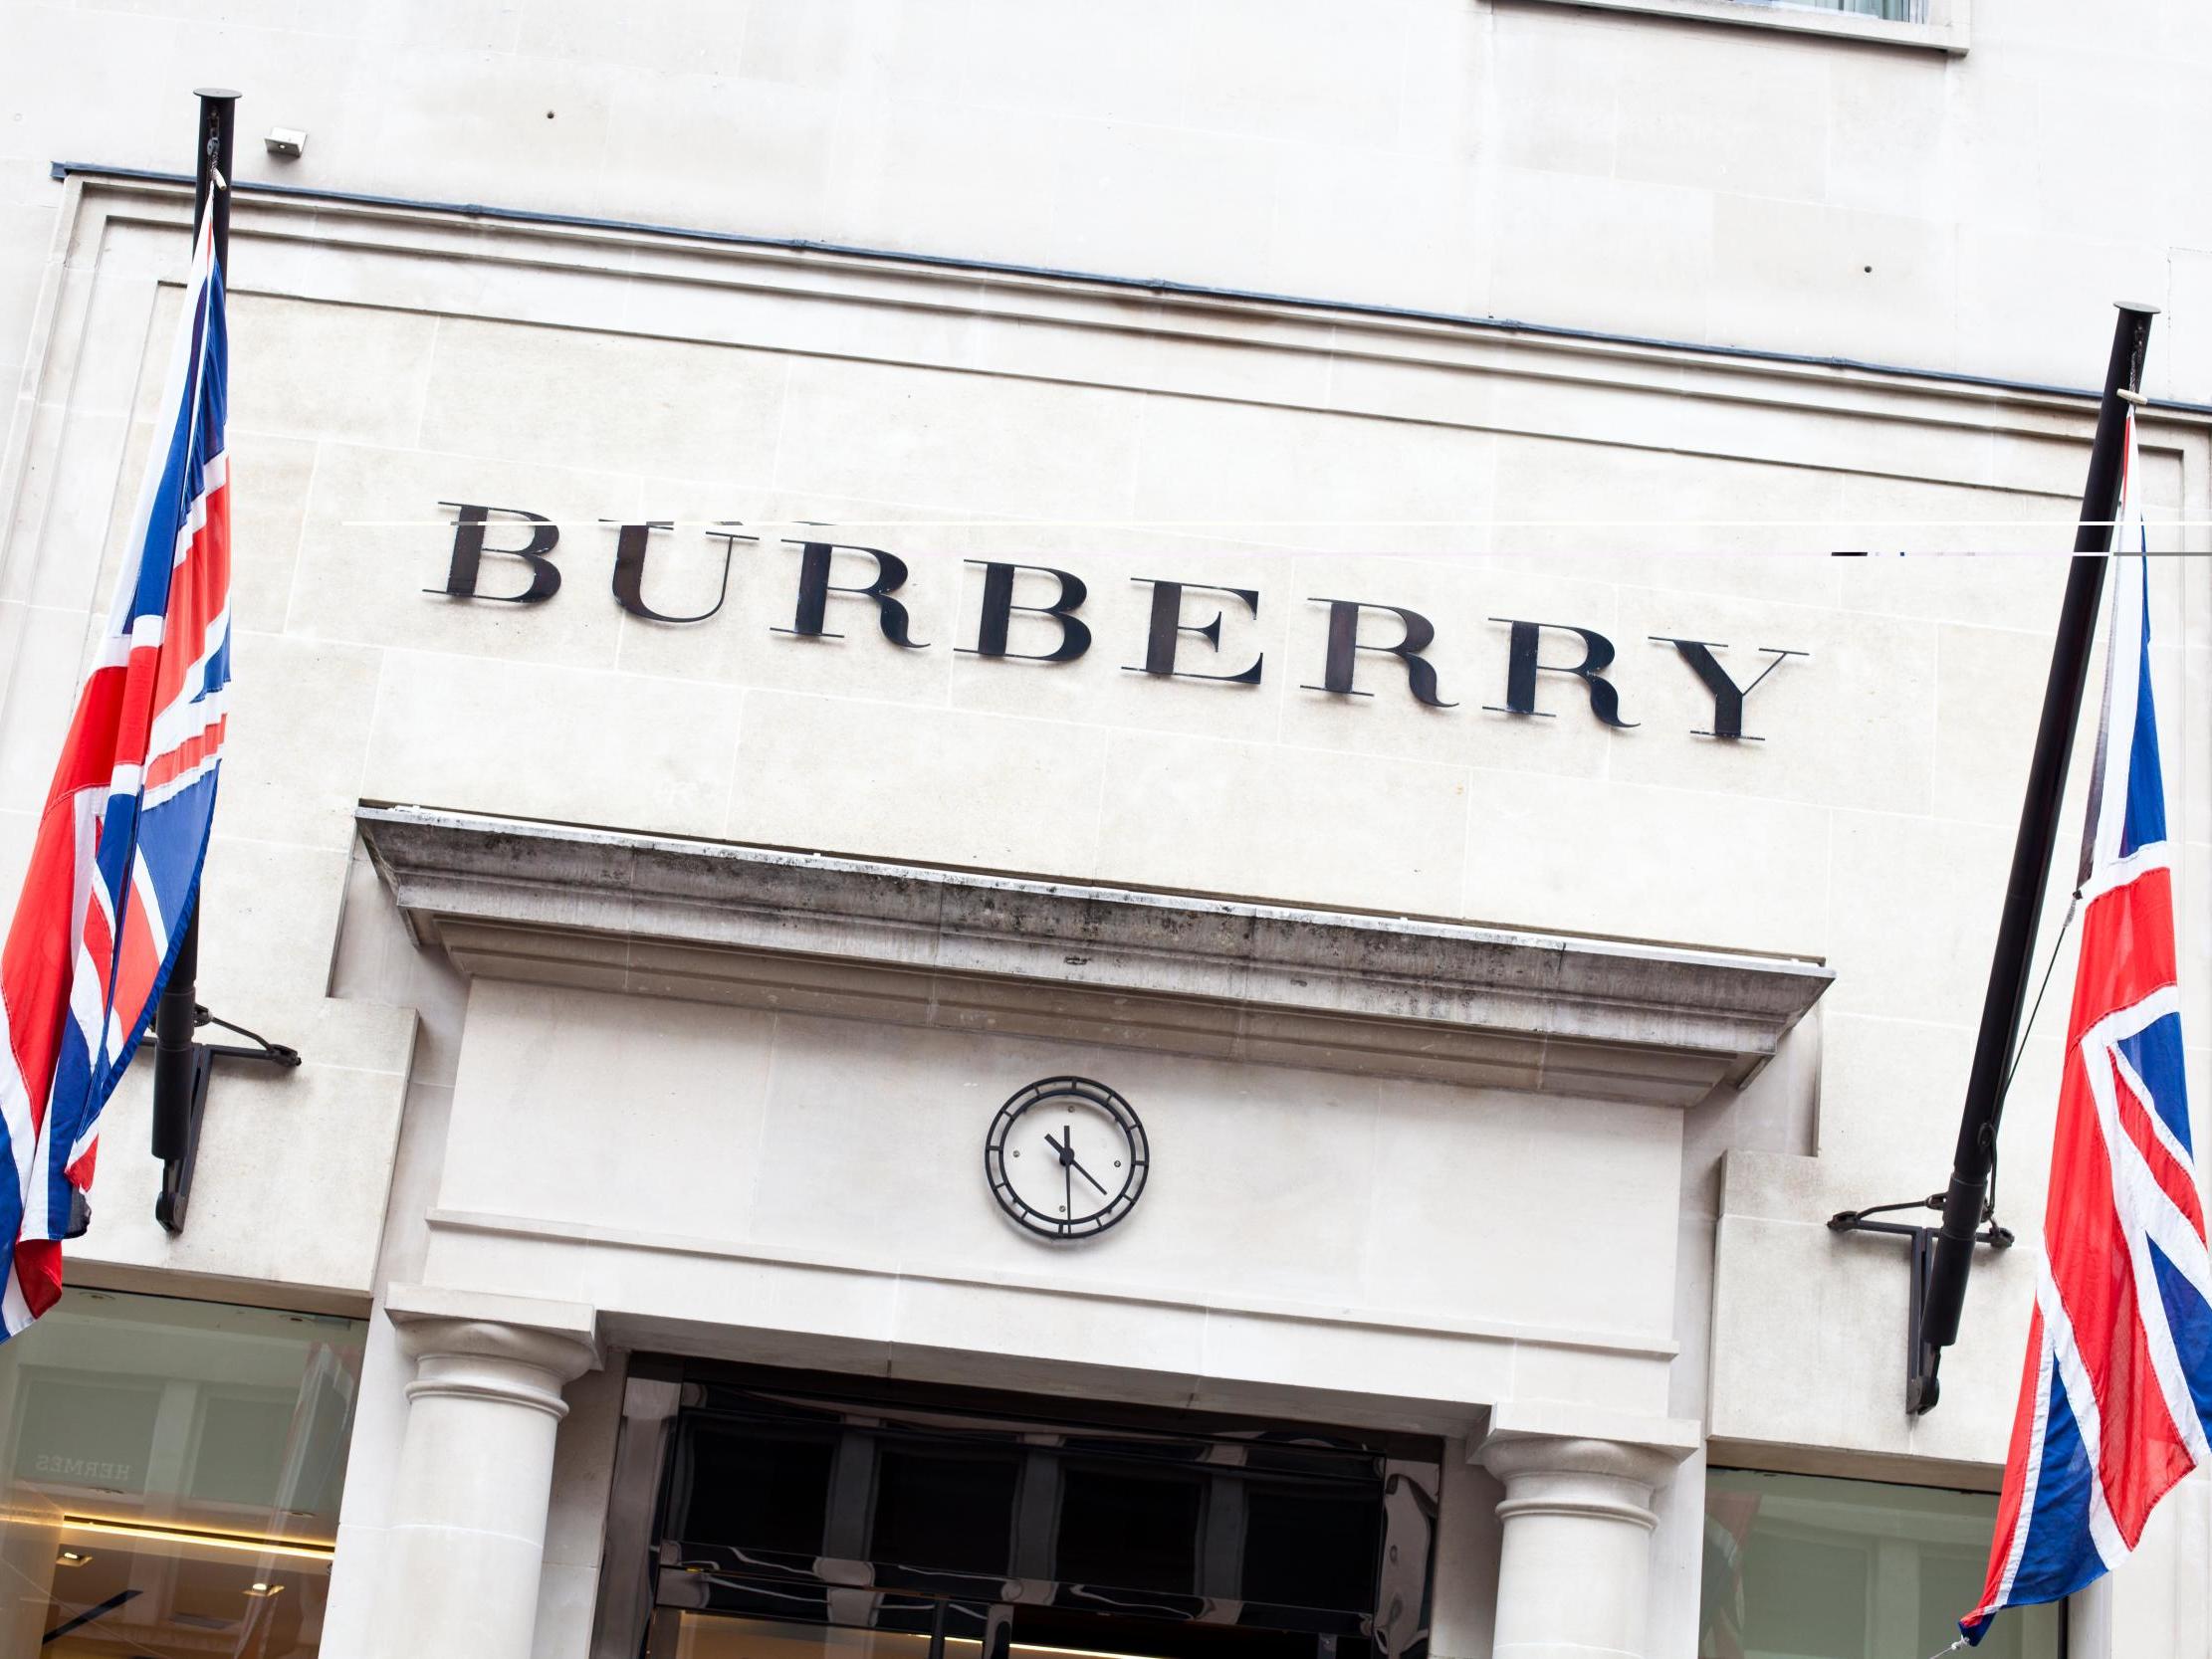 Burberry donates 100,000 pieces of PPE after transforming Yorkshire